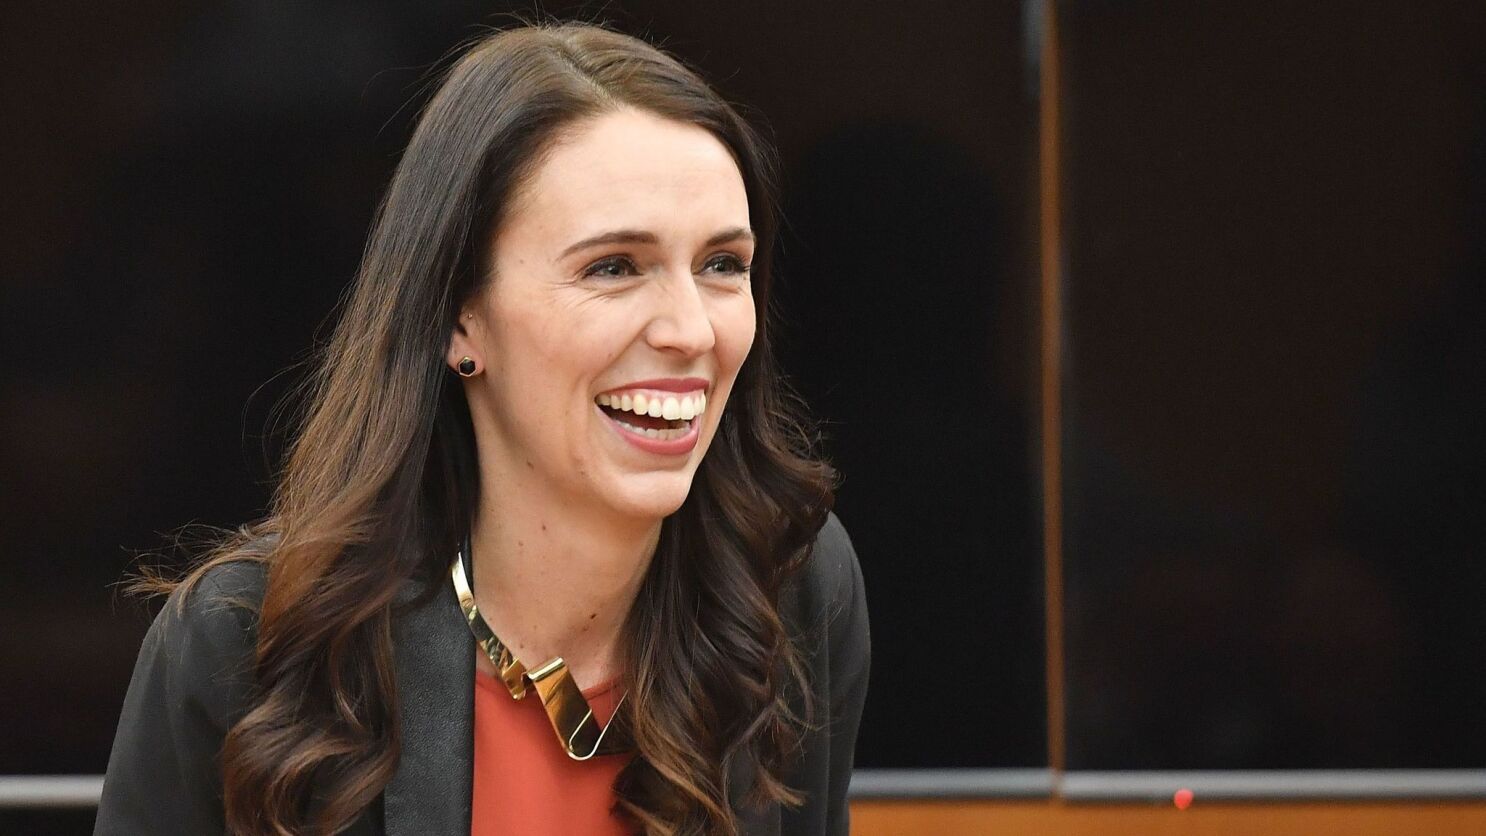 Jacindamania' sweeps New Zealand as it embraces a new prime minister, Jacinda  Ardern, who isn't your average pol - Los Angeles Times